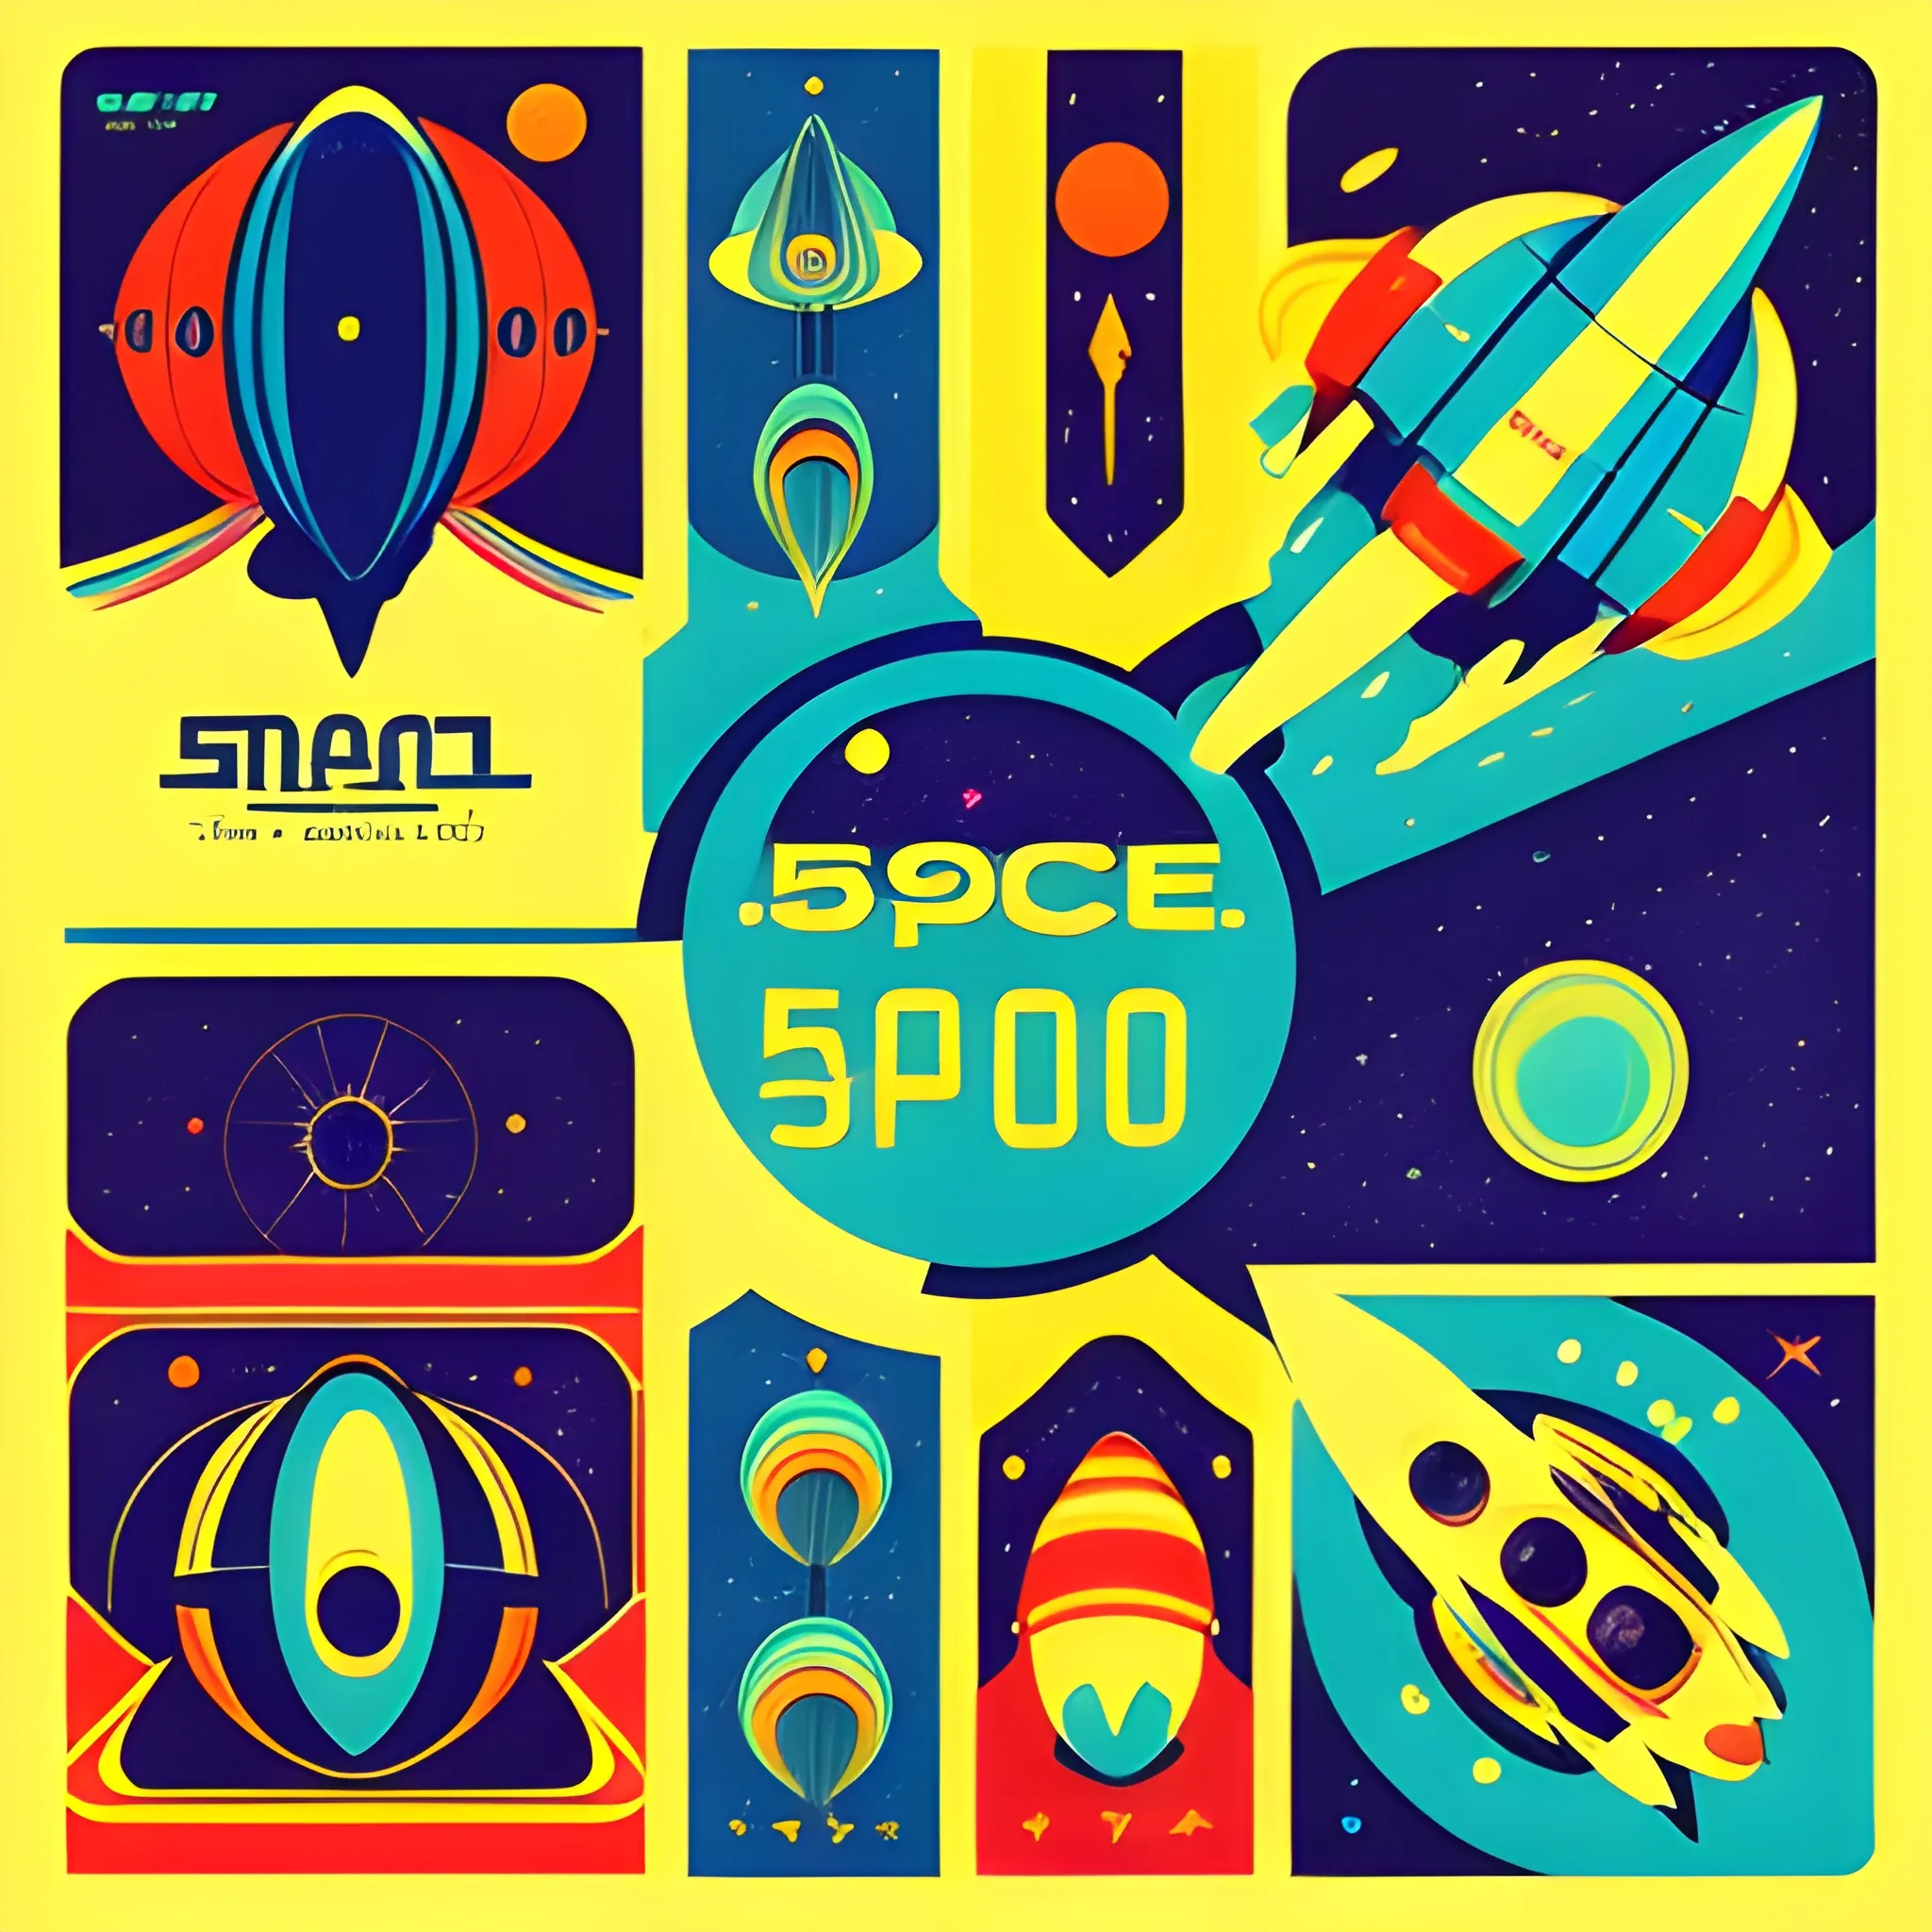 Retro style that evokes space age nostalgia of the 60s and 70s. Uses vibrant colors and graphics inspired by old sci-fi movies and space travel posters., 3D